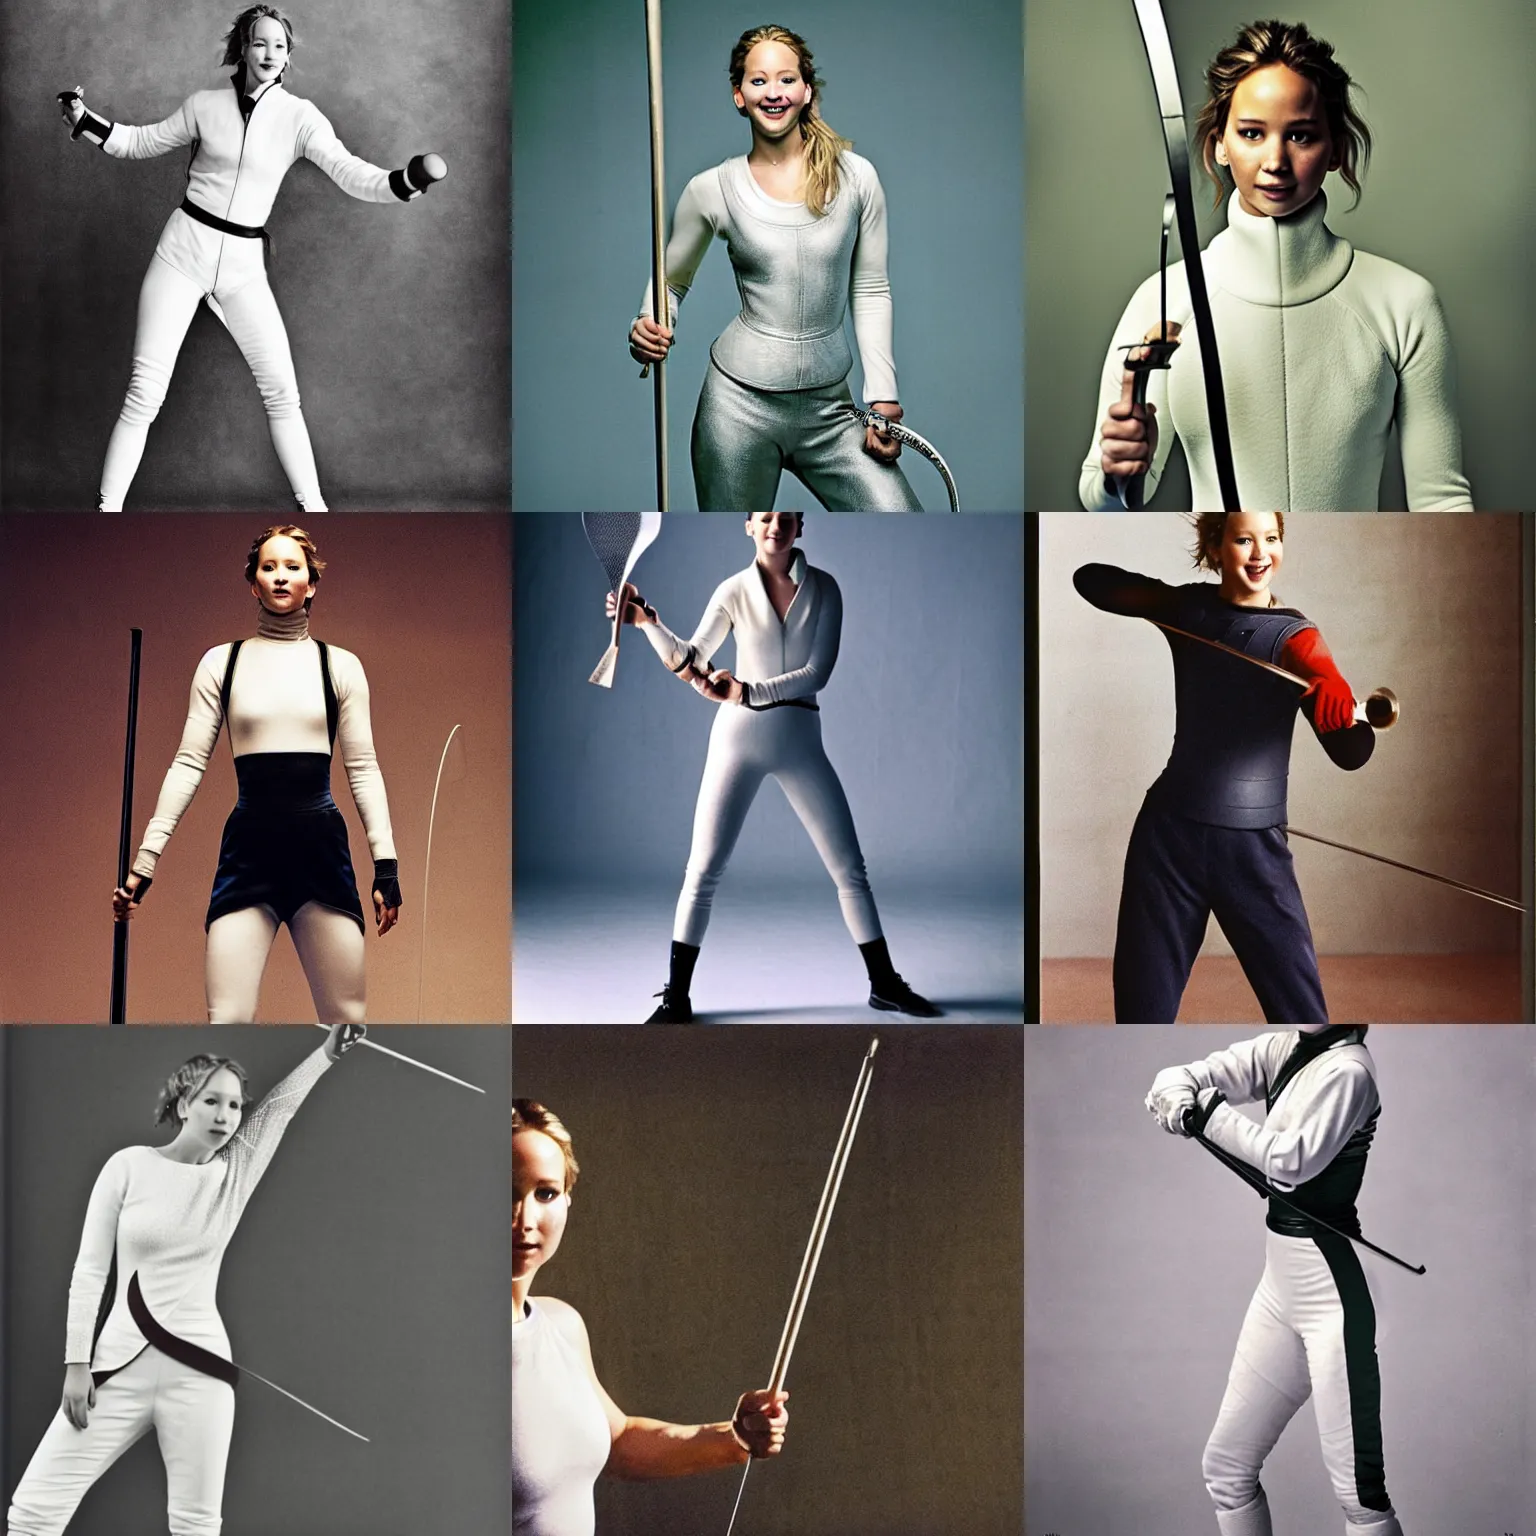 Prompt: Jennifer Lawrence as a fencer, holding an epée toward the camera, smiling, photo by Annie Leibovitz